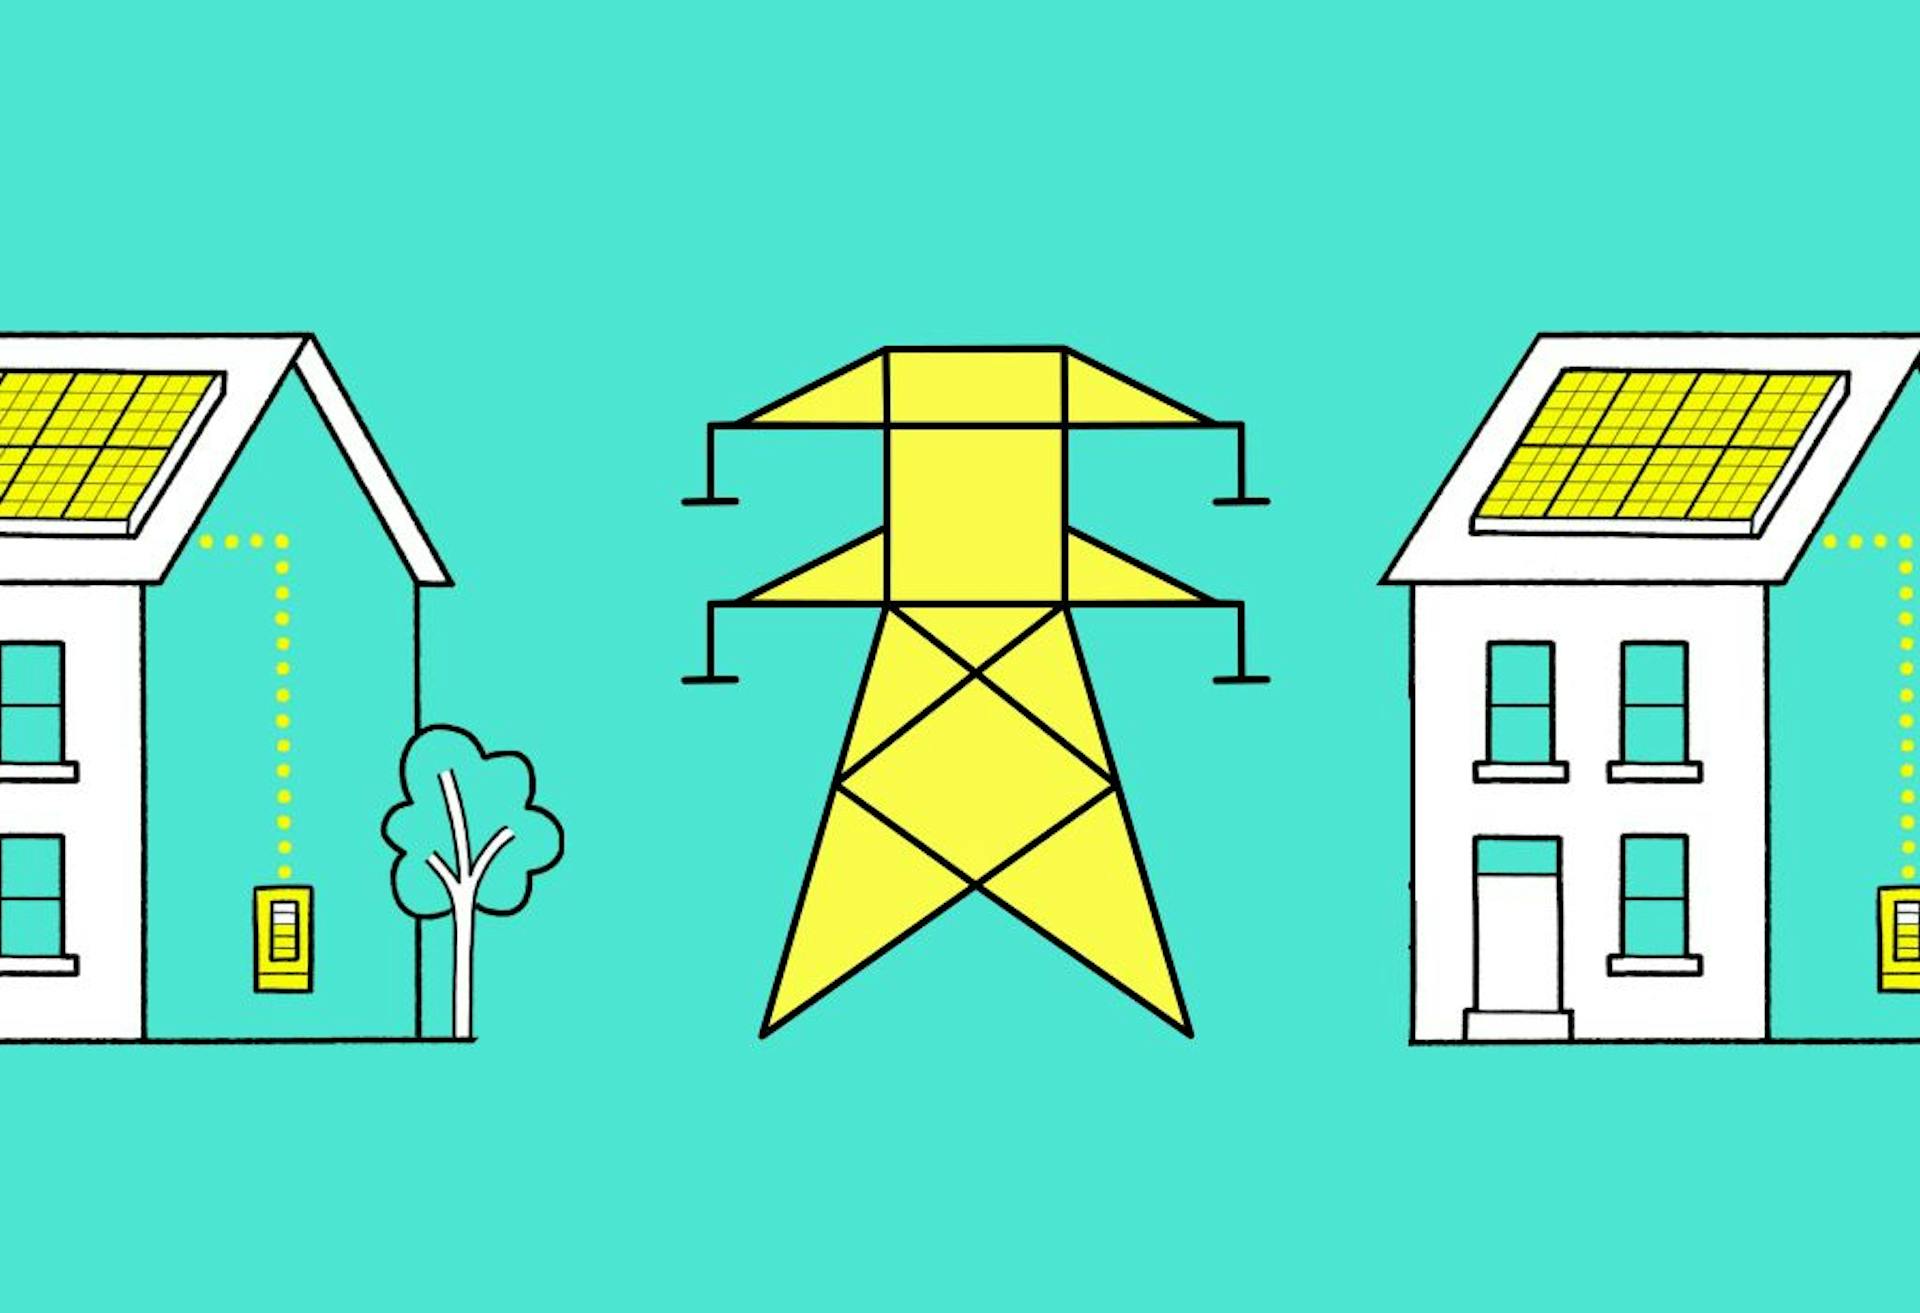 Two cartoon houses with solar panels on their roofs, with a yellow electricity pylon in between them. Turquoise background